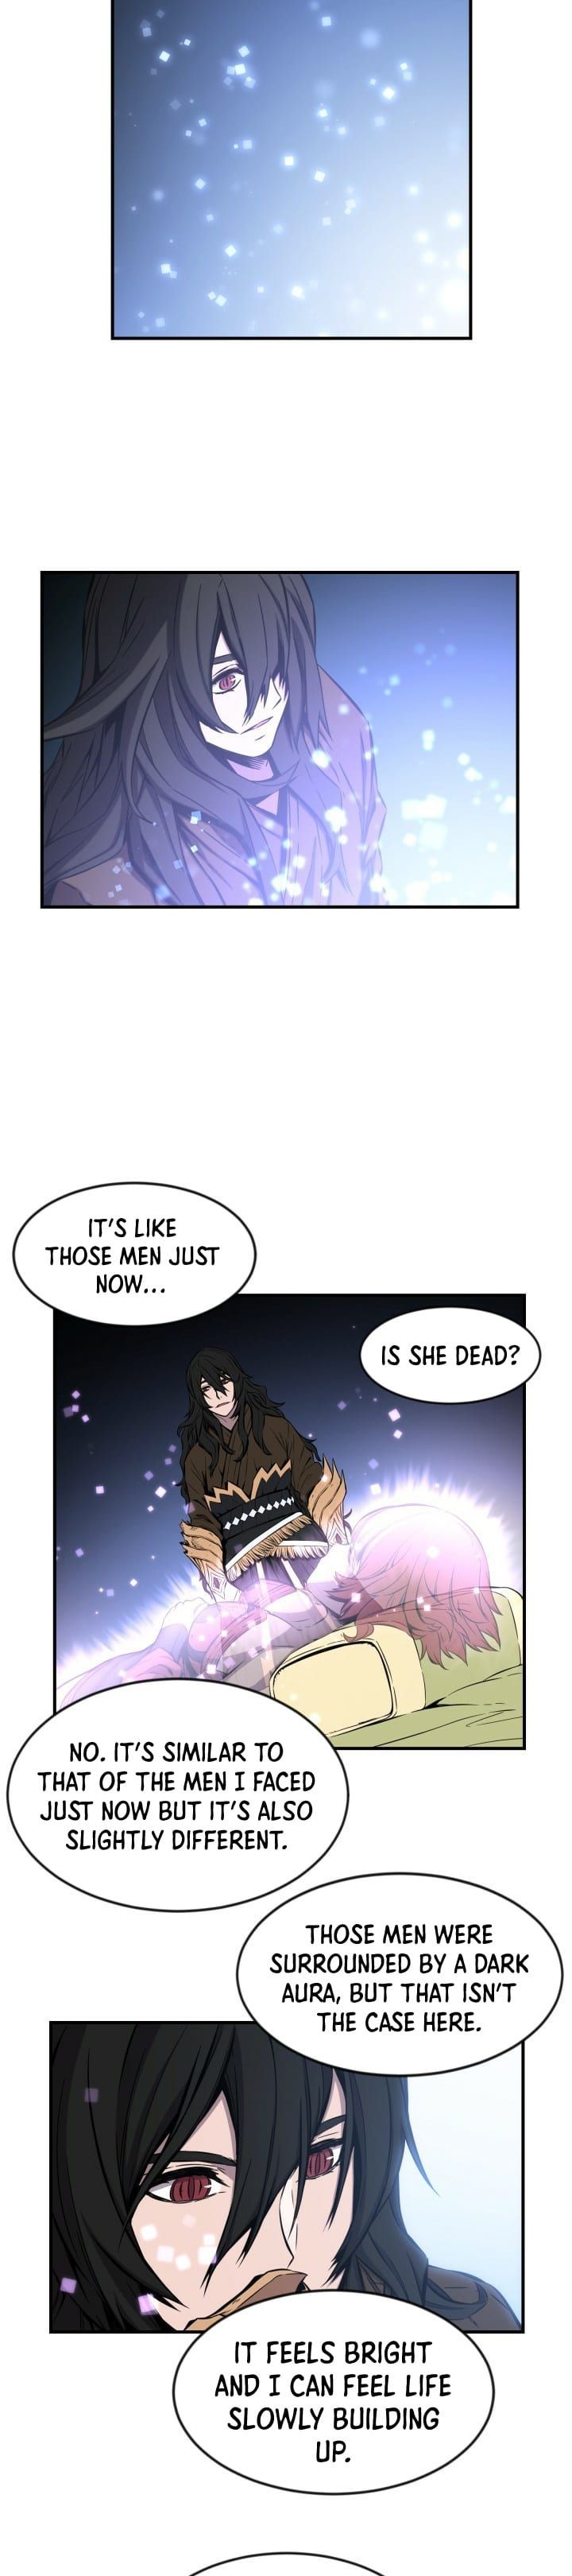 Legend of Mir: Gold Armored Sword Dragon Chapter 6 page 11